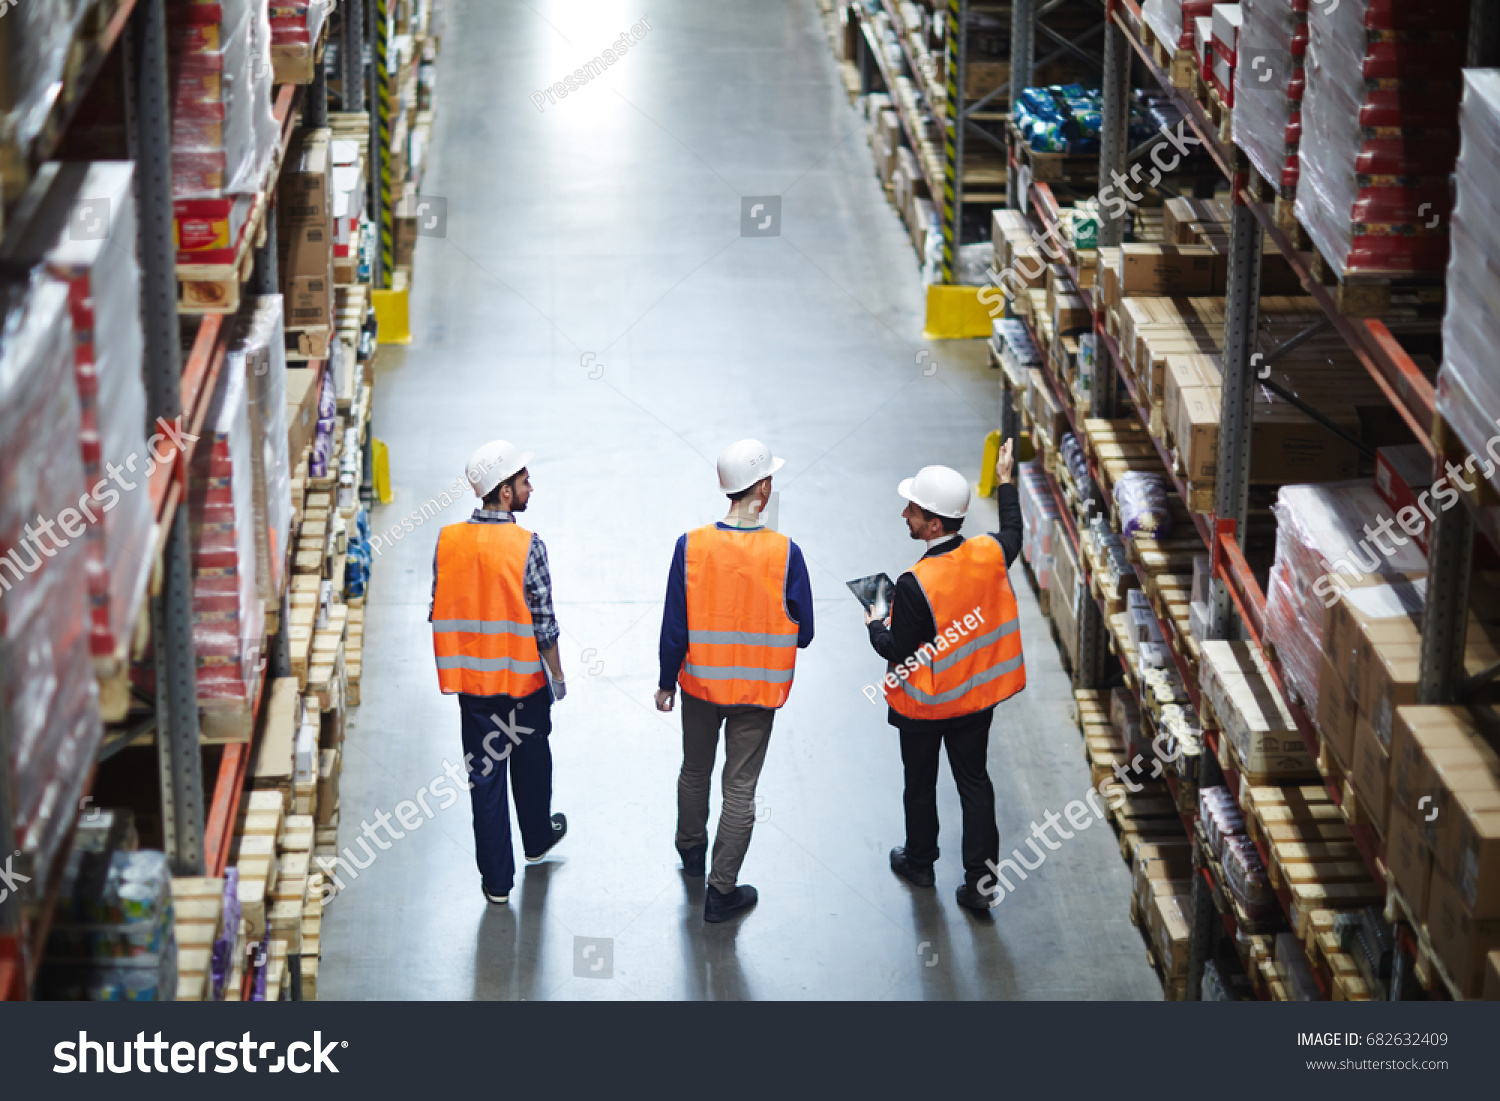 Group of warehouse workers wearing hardhats and reflective jackets waking in aisle between tall racks with packed goods, back view #682632409